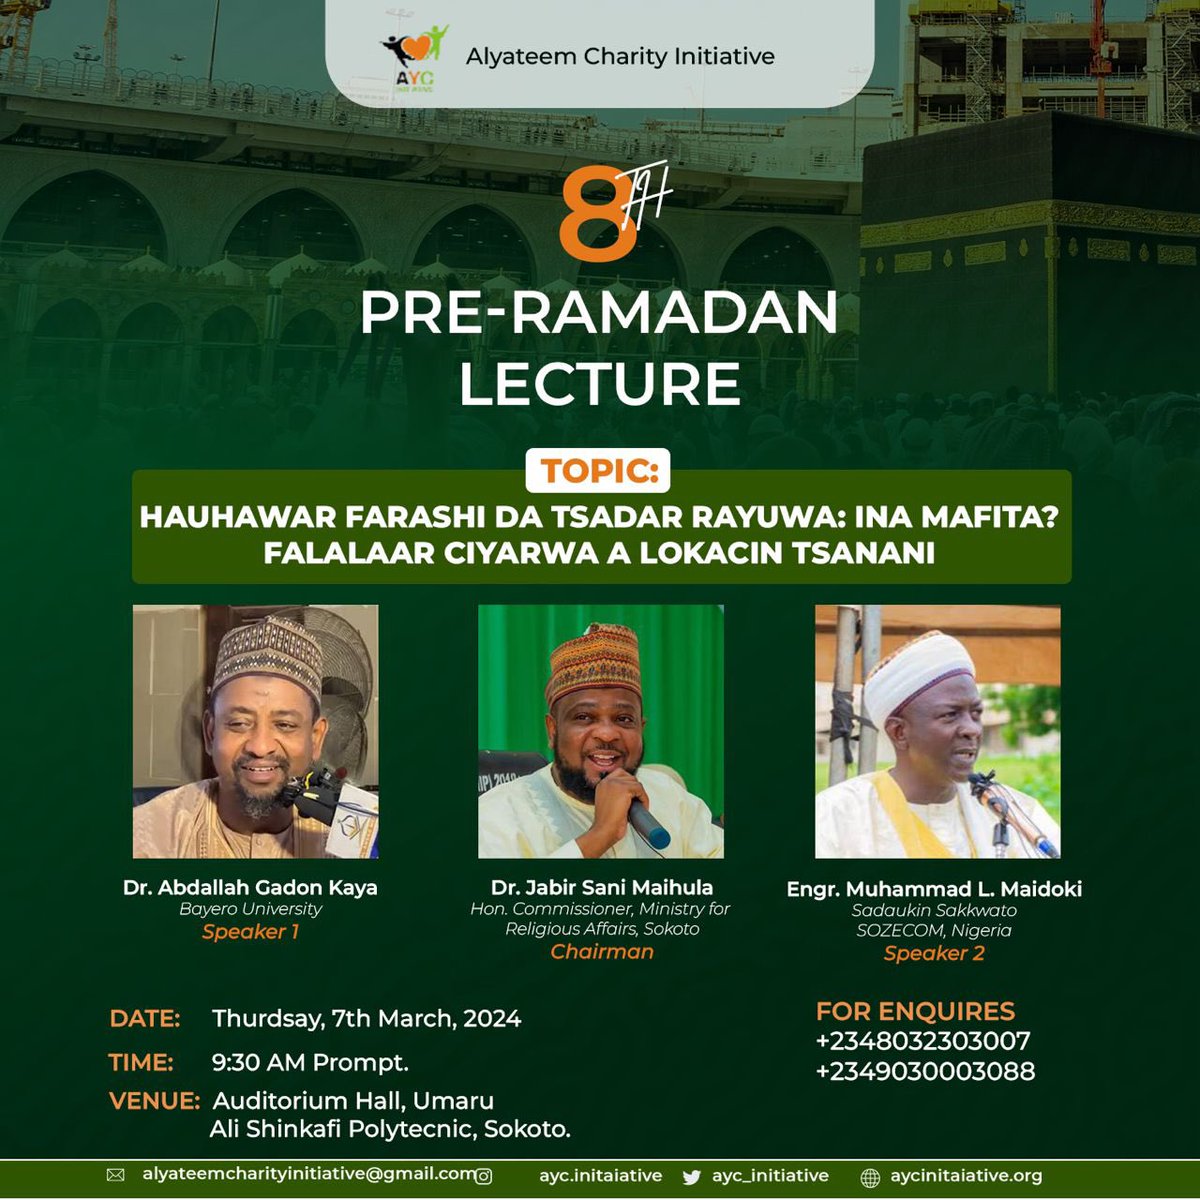 I'm deeply honored to serve as the event chairman for @AYC_initiative annual pre-Ramadan lecture, featuring distinguished speakers @abdallahgkaya and @LawalMaidoki